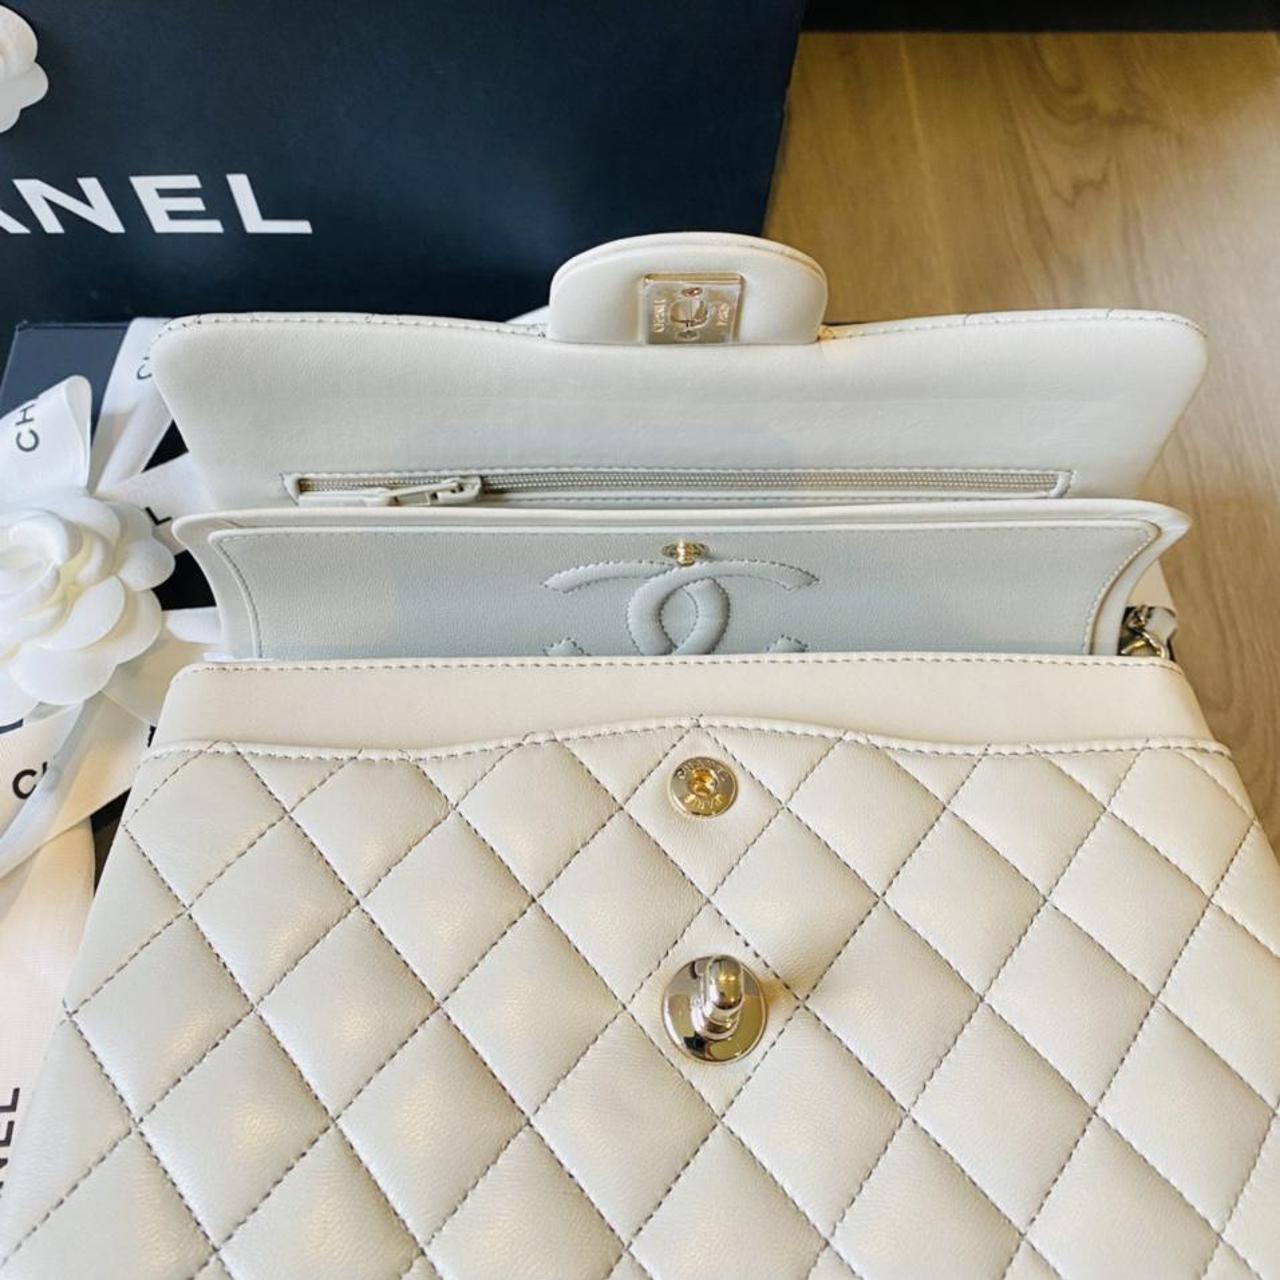 Chanel Women's Cream and Gold Bag (3)